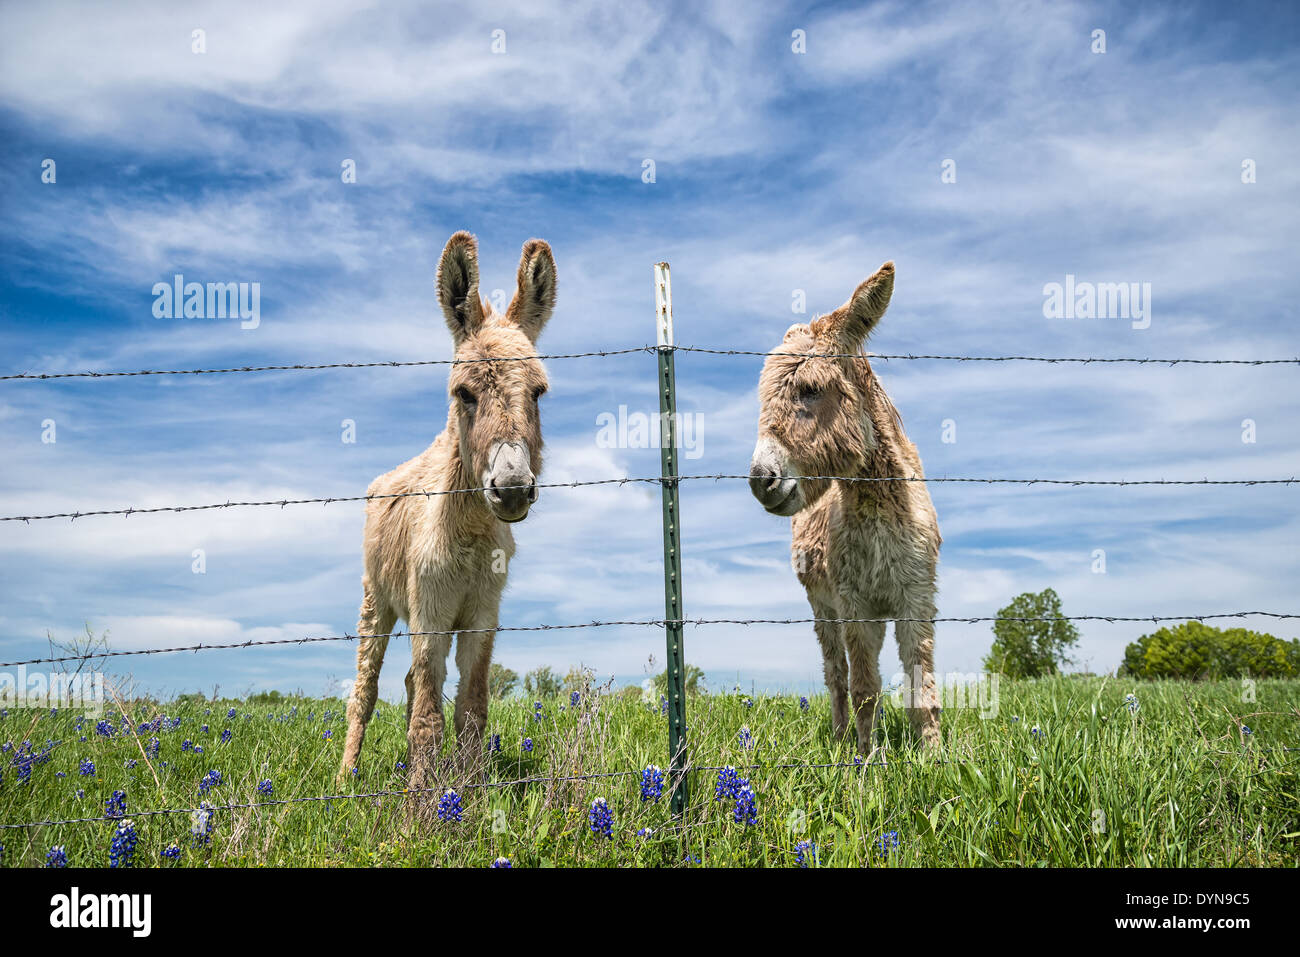 Two donkeys standing behind barbwire fence on spring pasture Stock Photo